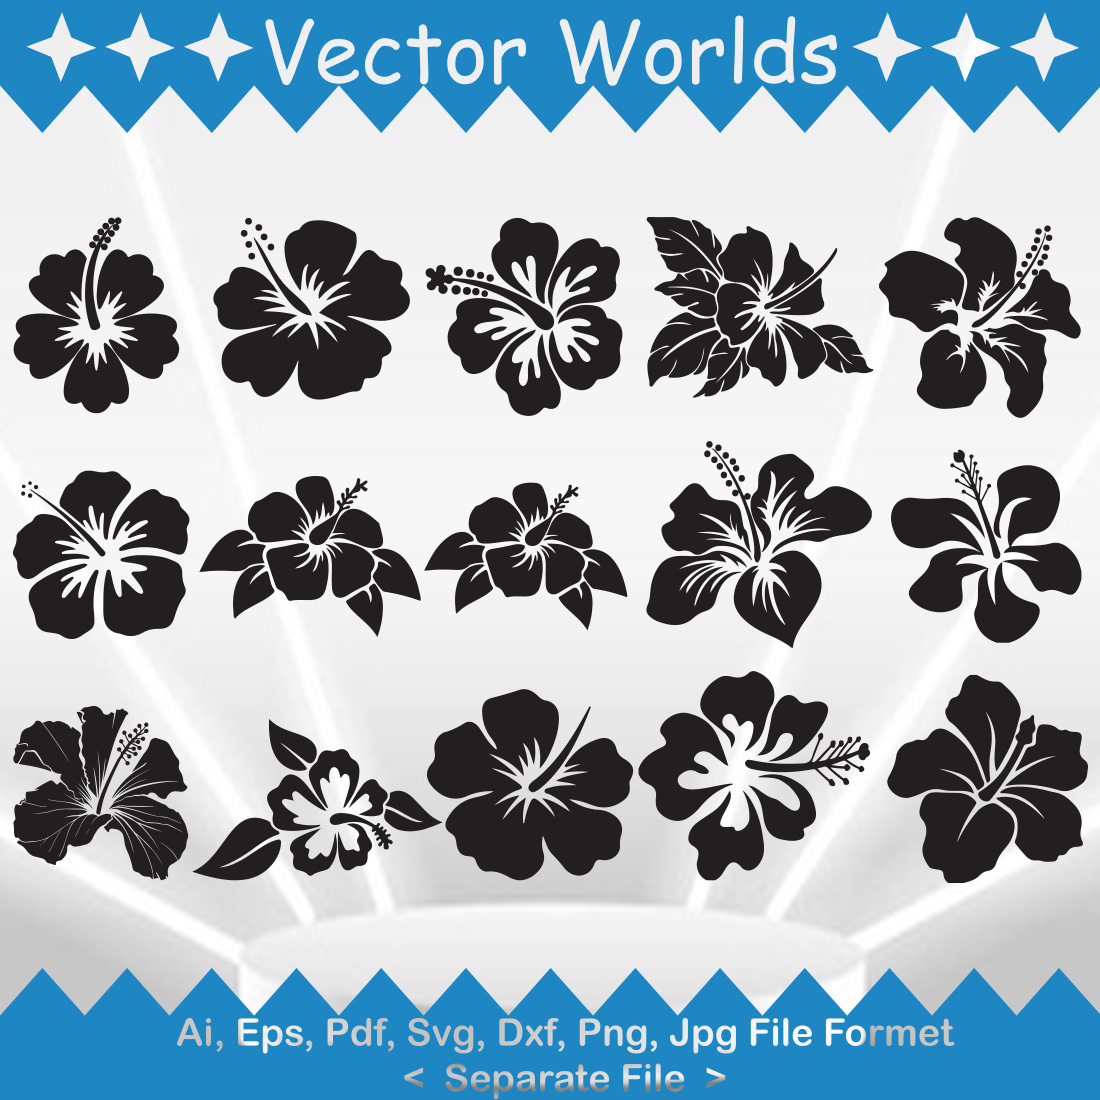 Hibiscus SVG Vector Design cover image.